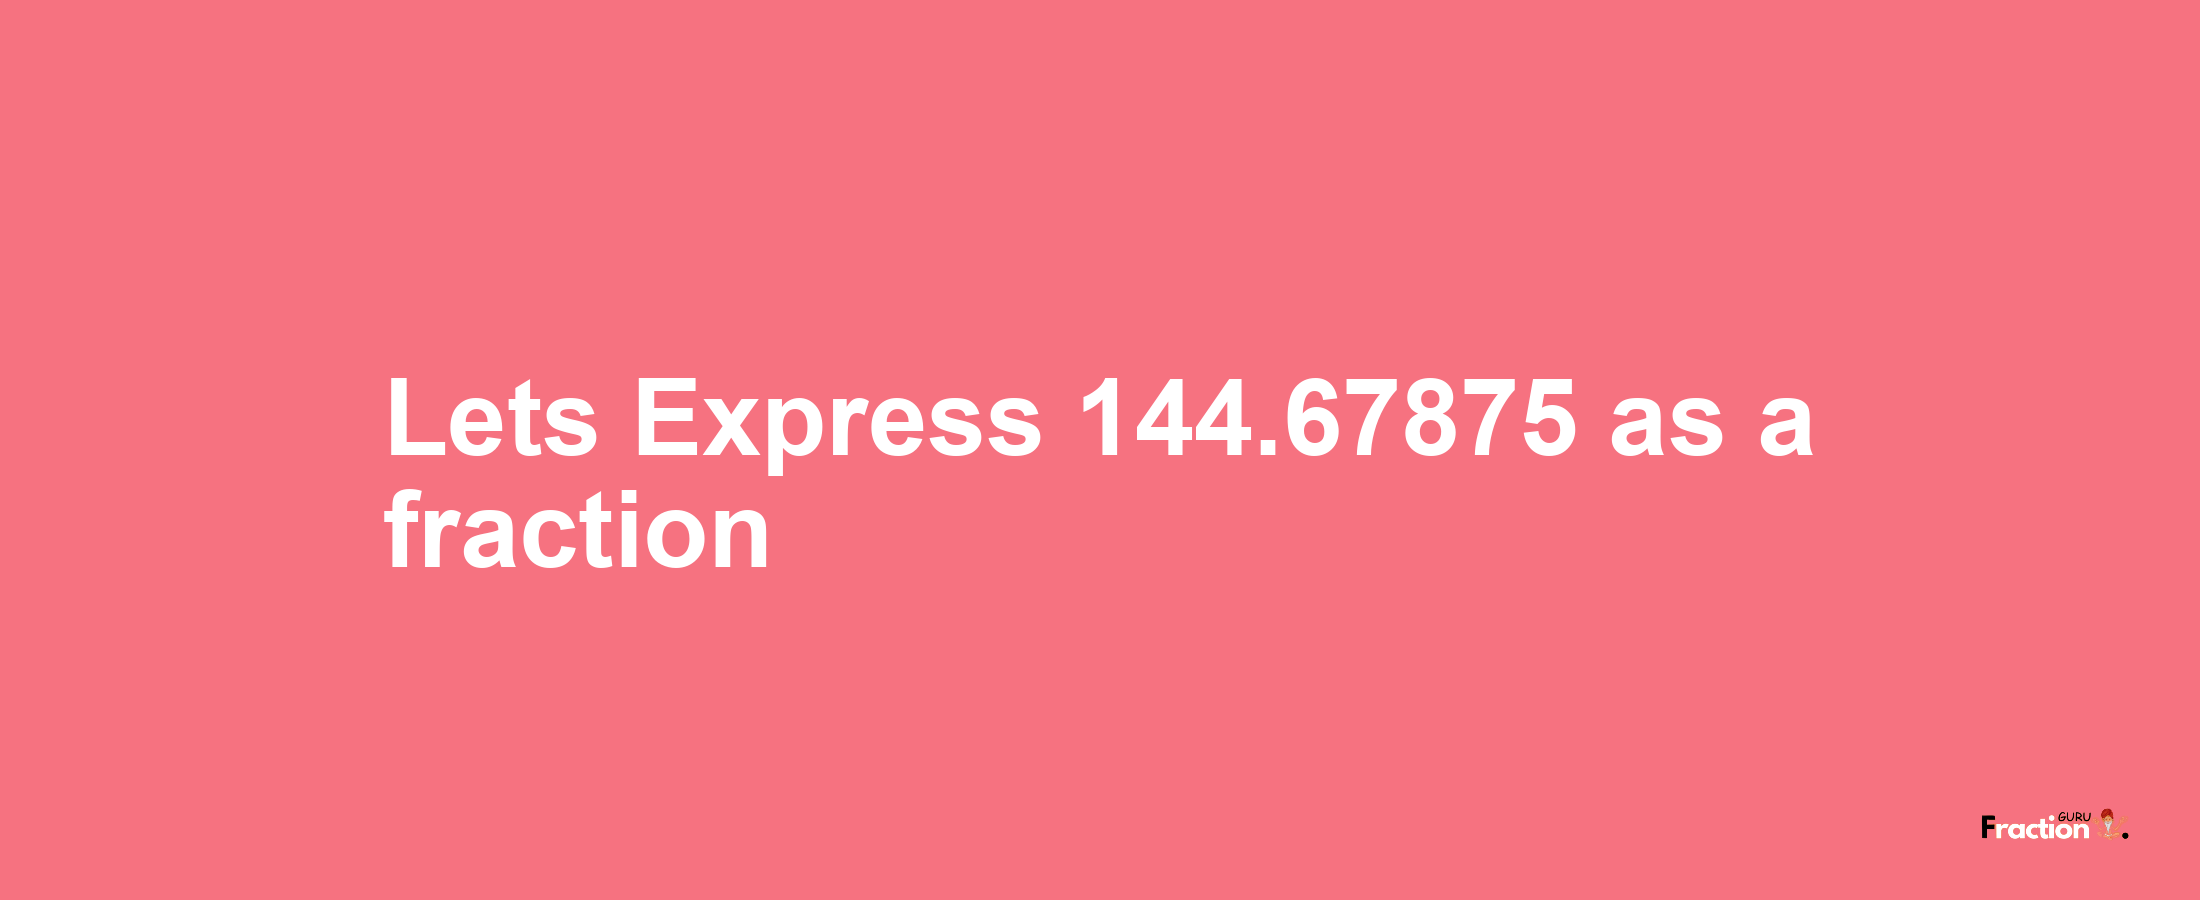 Lets Express 144.67875 as afraction